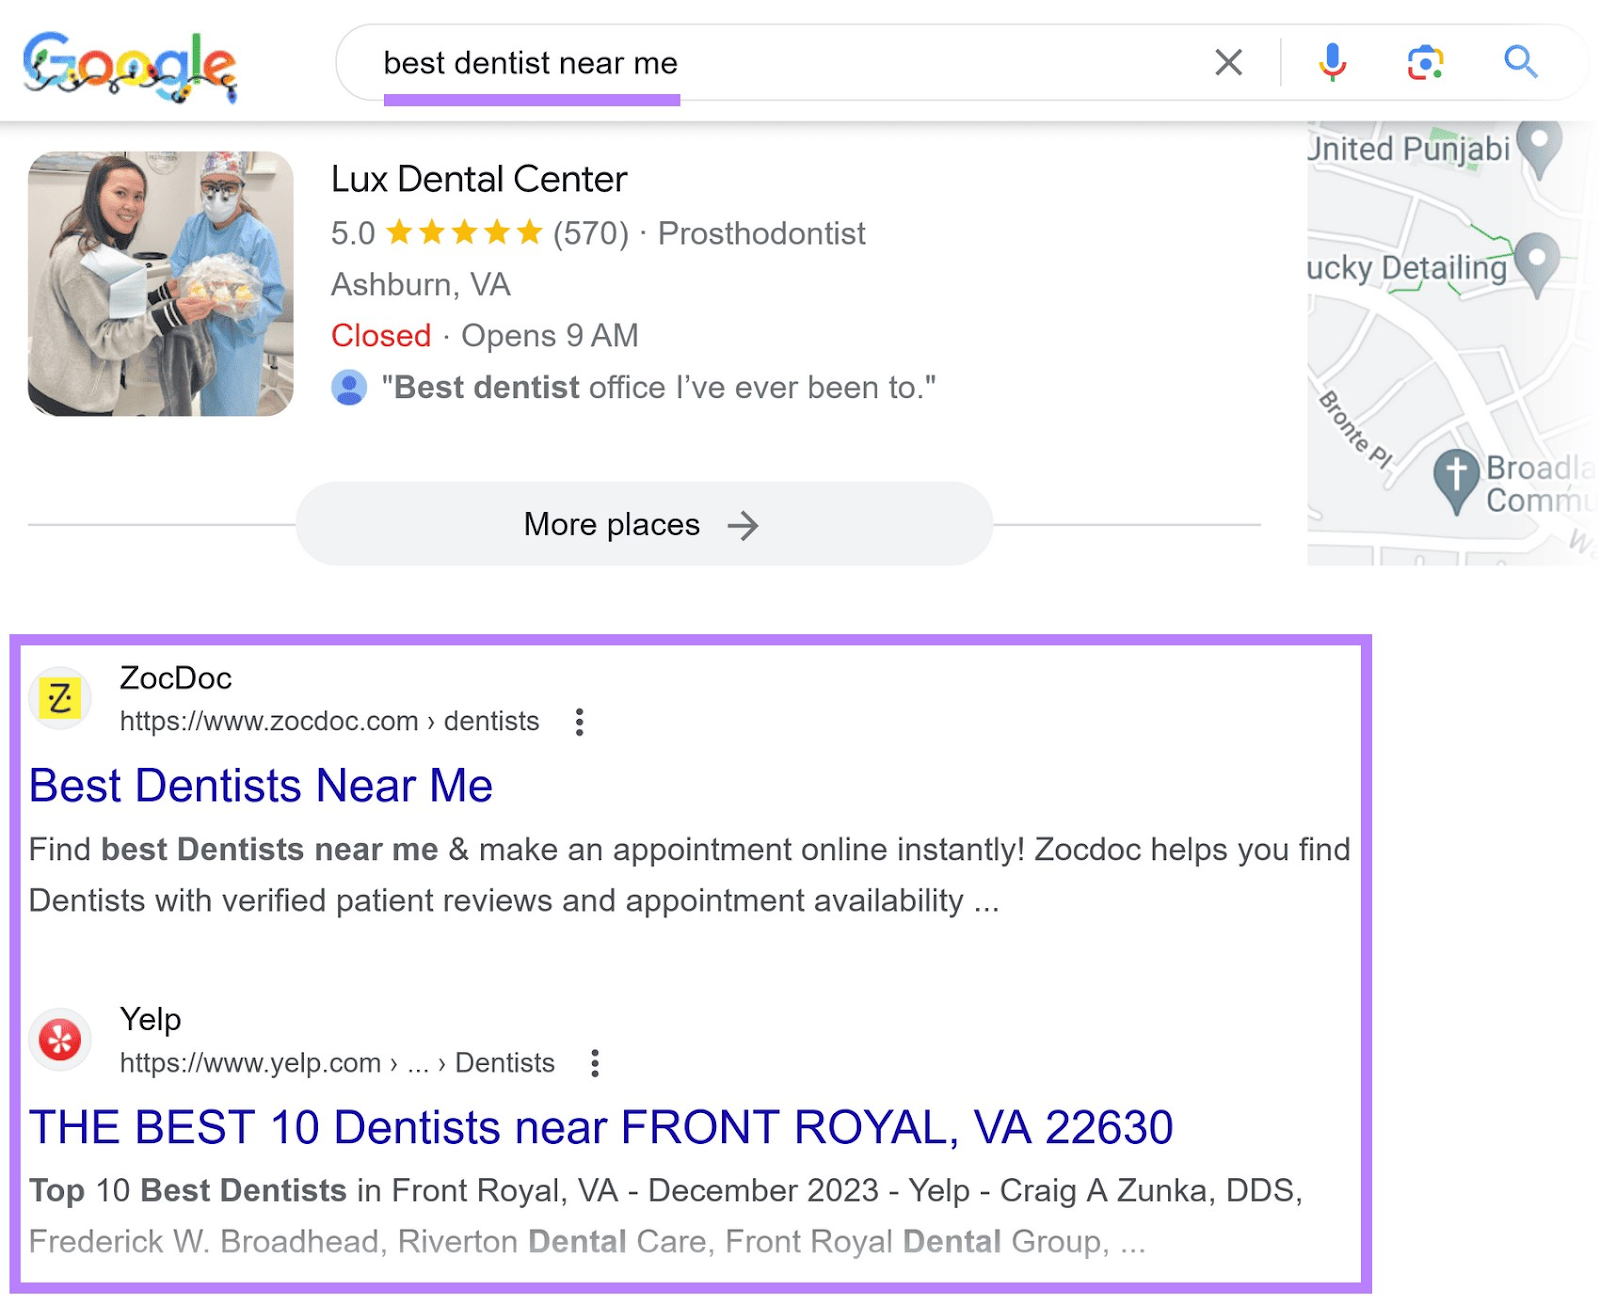 ZocDoc and Yelp organic results for "best dentist near me" query